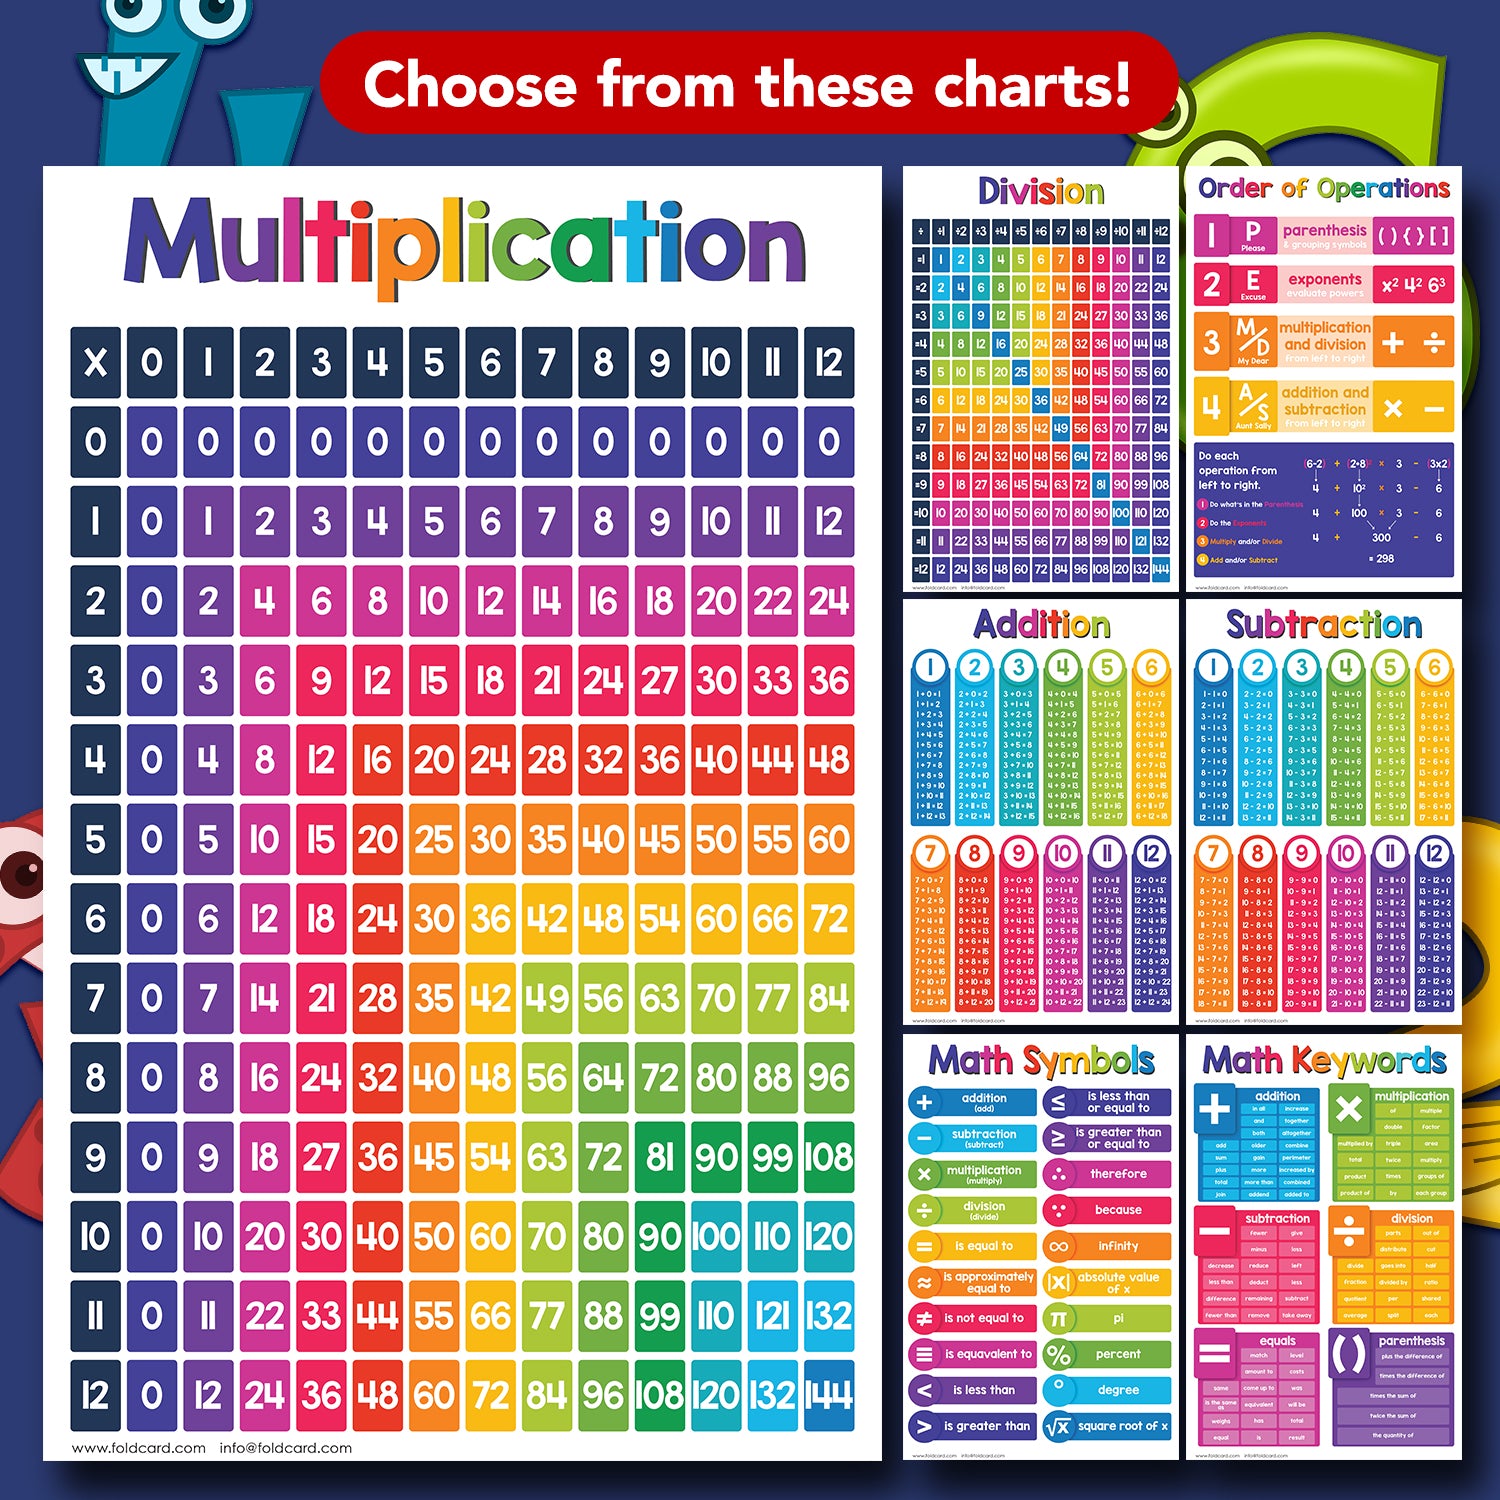 Order of Operations Chart Math Poster - 11" x 17" Educational Visual for Learning | 5-Pack